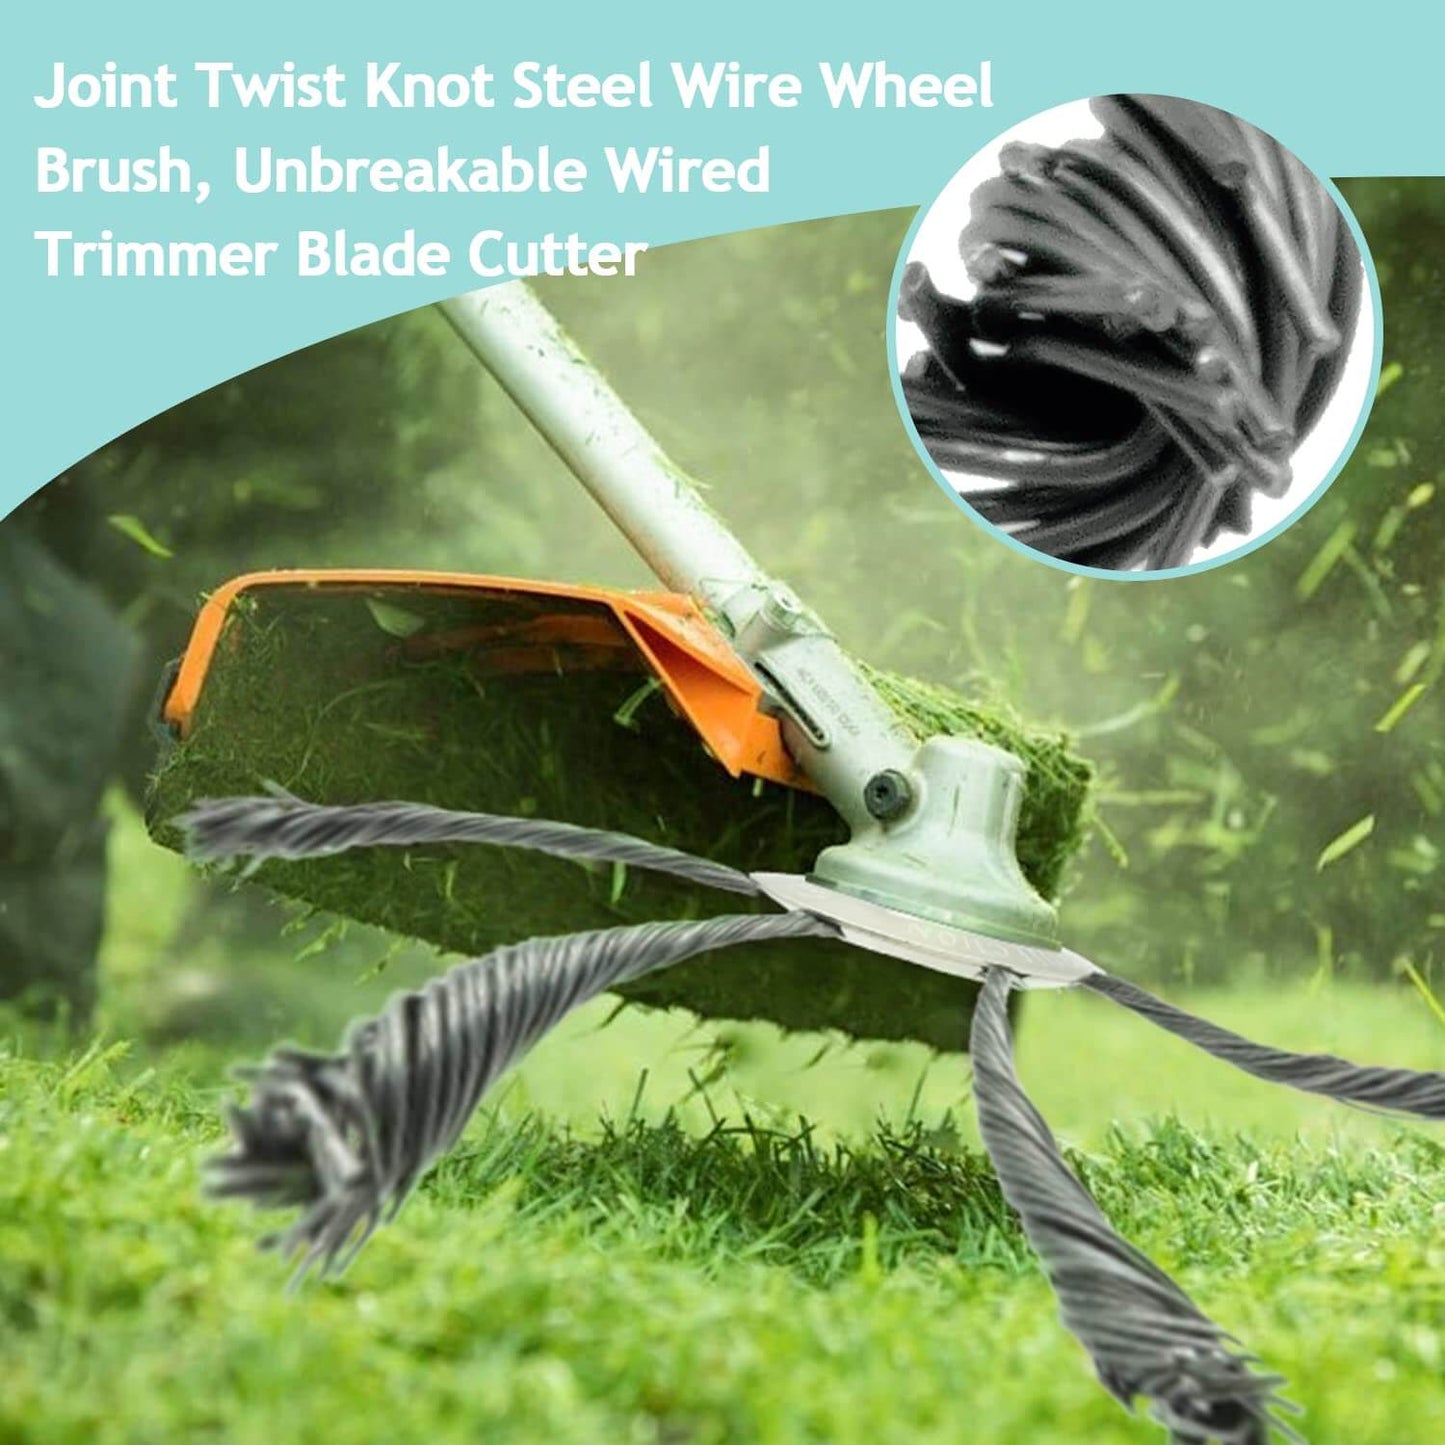 6 inch Metal Trimmer Head for Electric Grass Trimmer